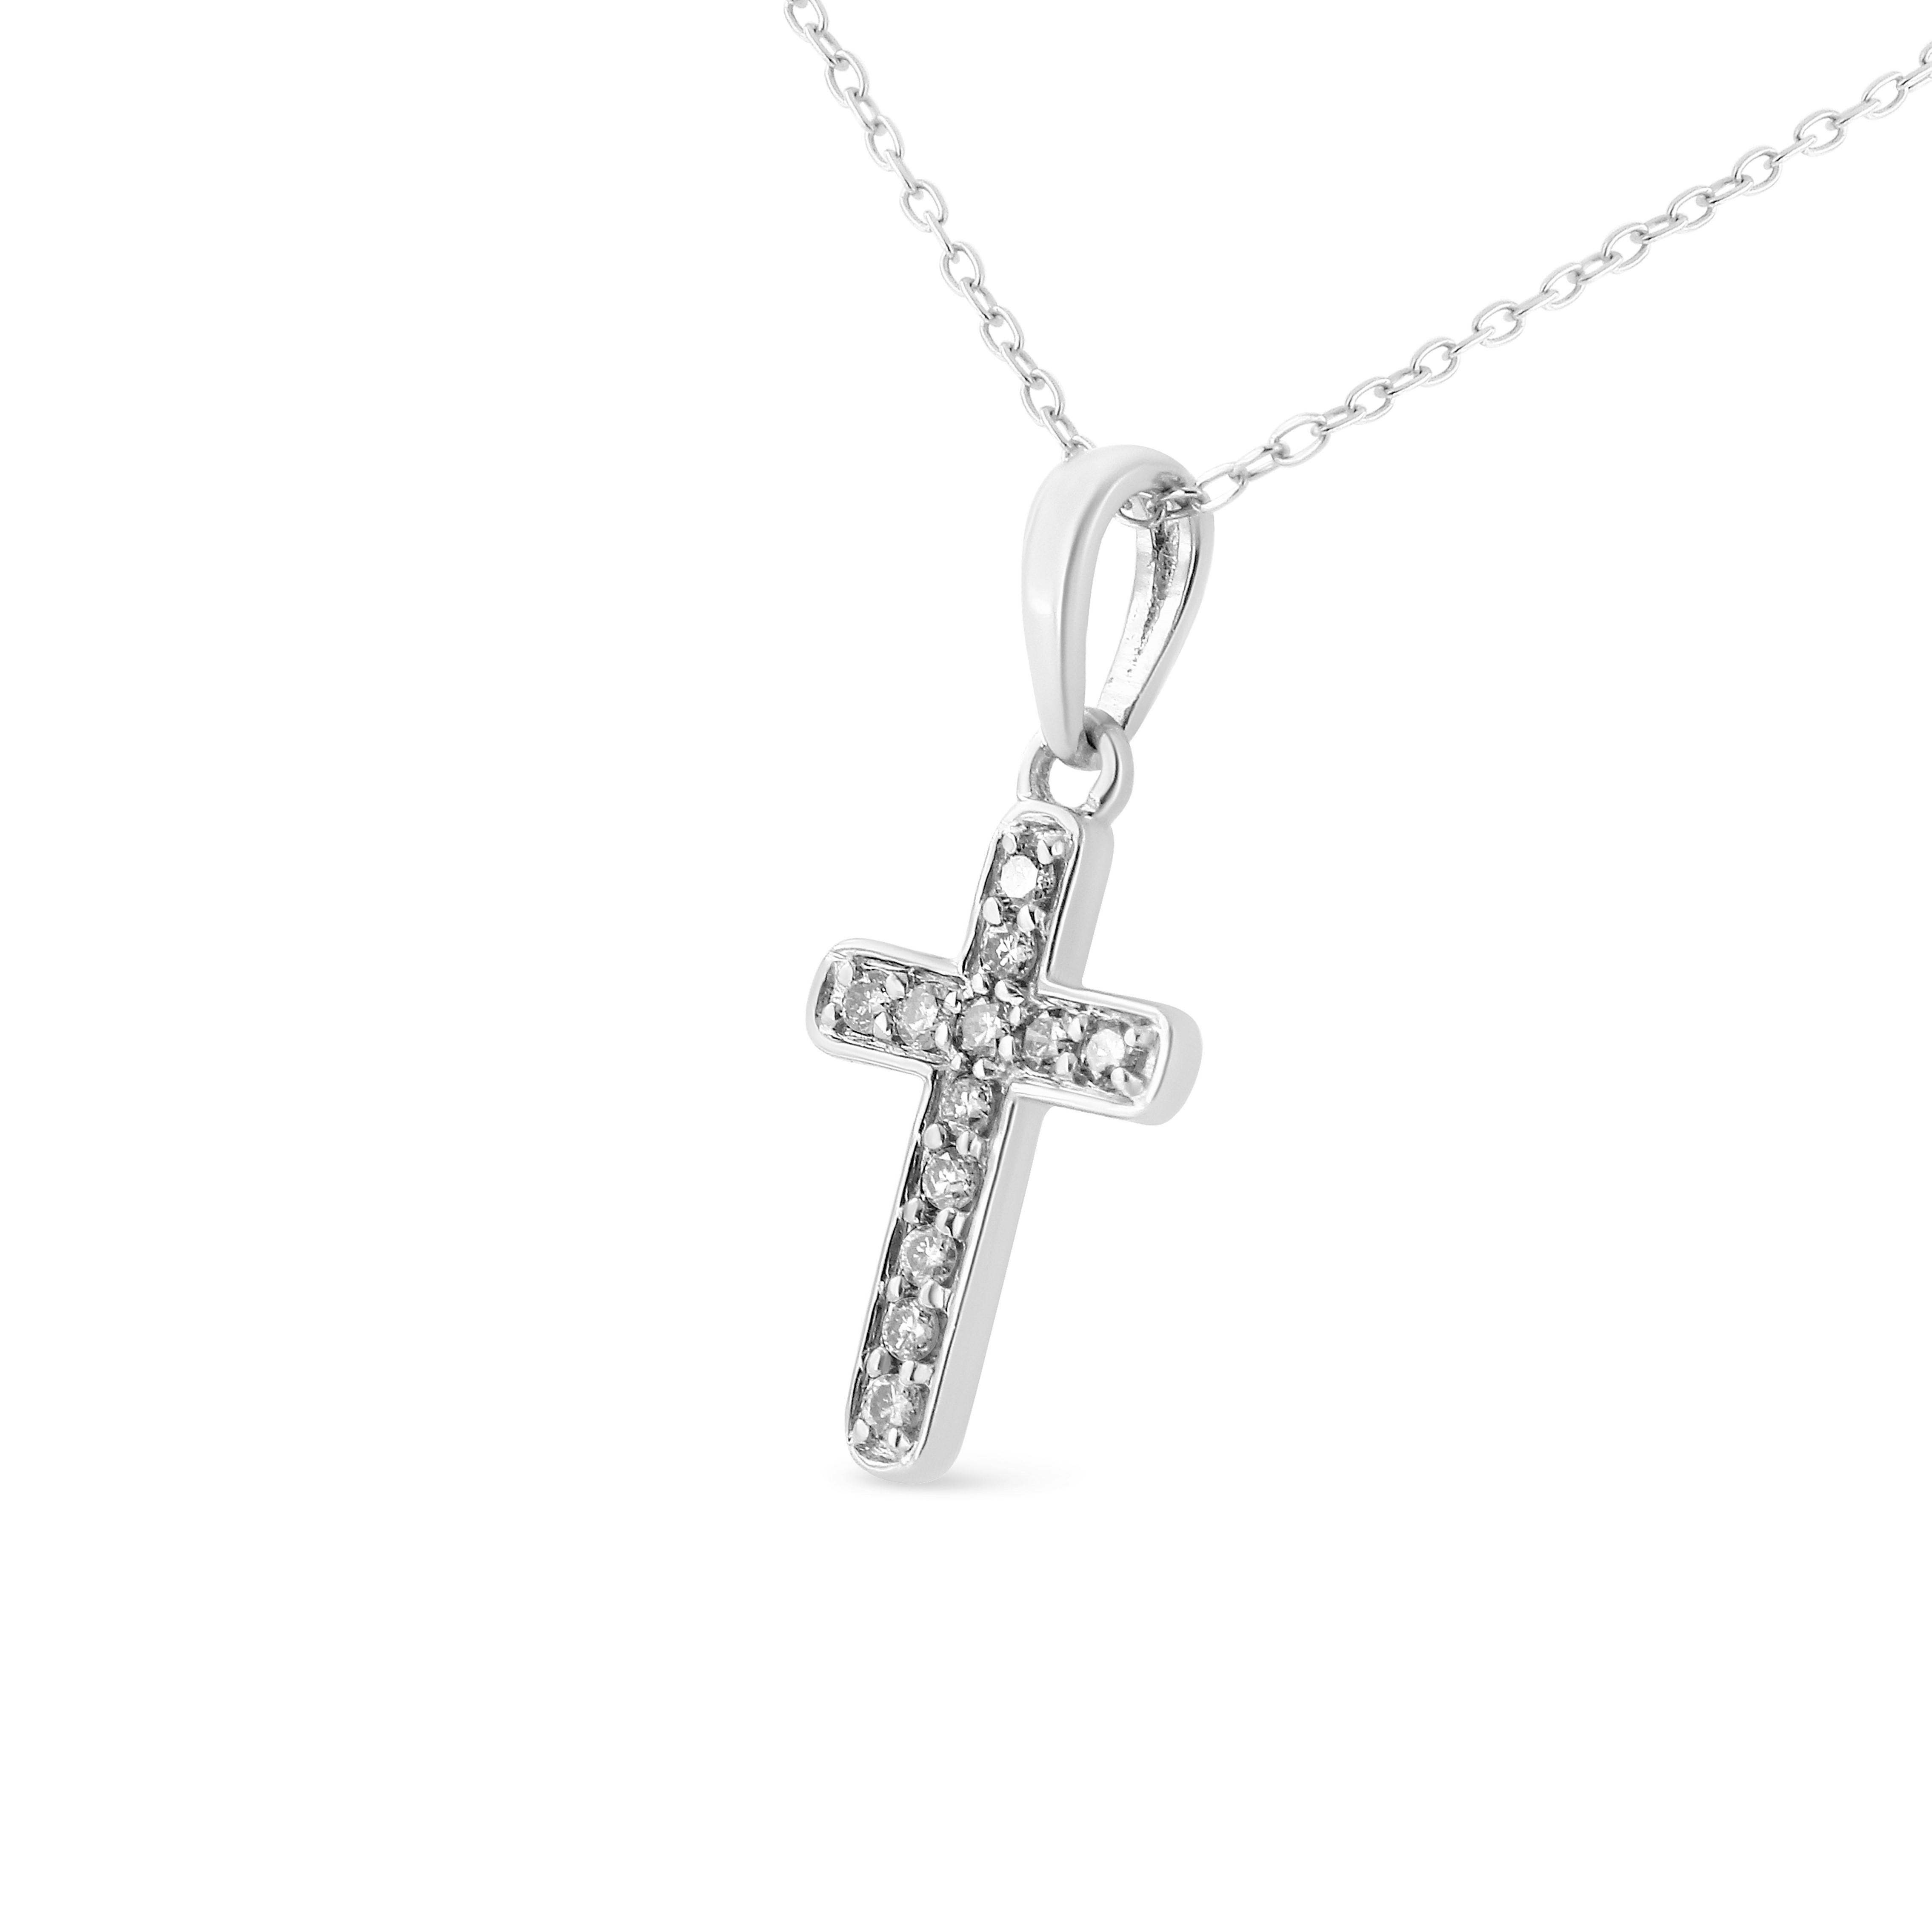 Celebrate your inner spirituality with this magnificent diamond cross pendant. This necklace is embellished with a 1/4 cttw of natural, round-cut diamonds. The prong-set diamonds are set onto genuine .925 sterling silver, plated with rhodium (a